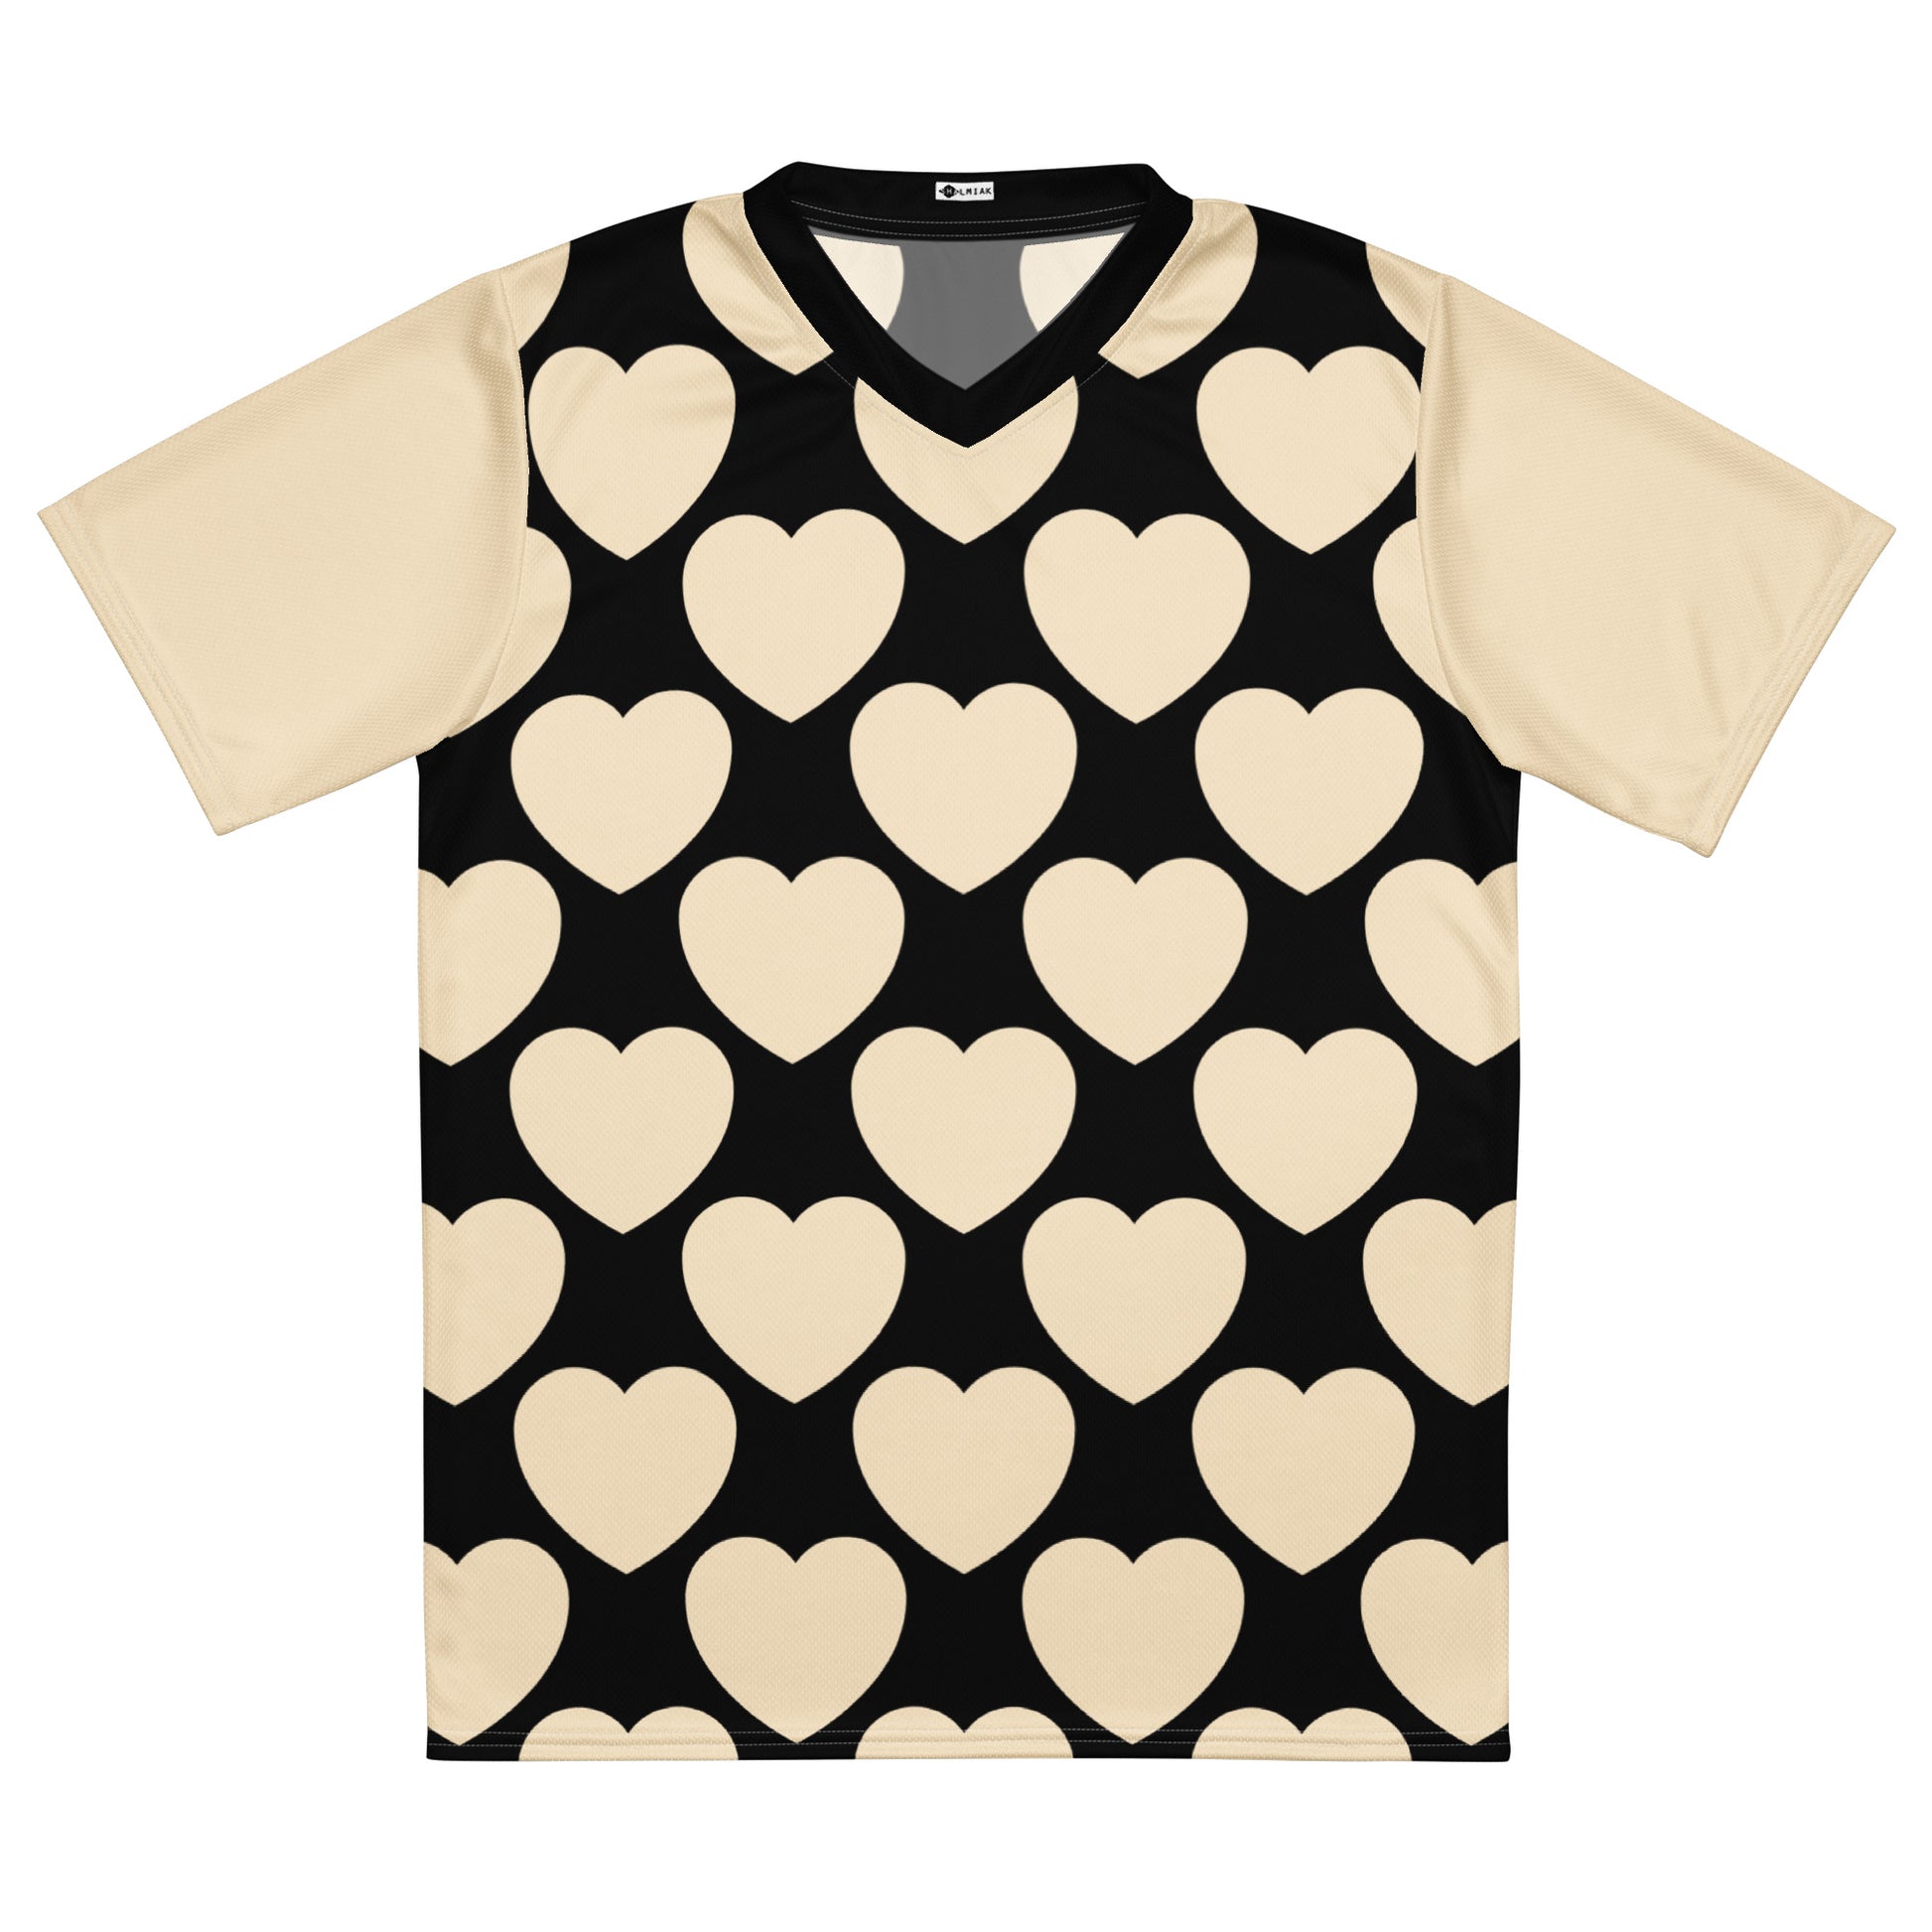 ELLIE LOVE black - Recycled unisex sports jersey